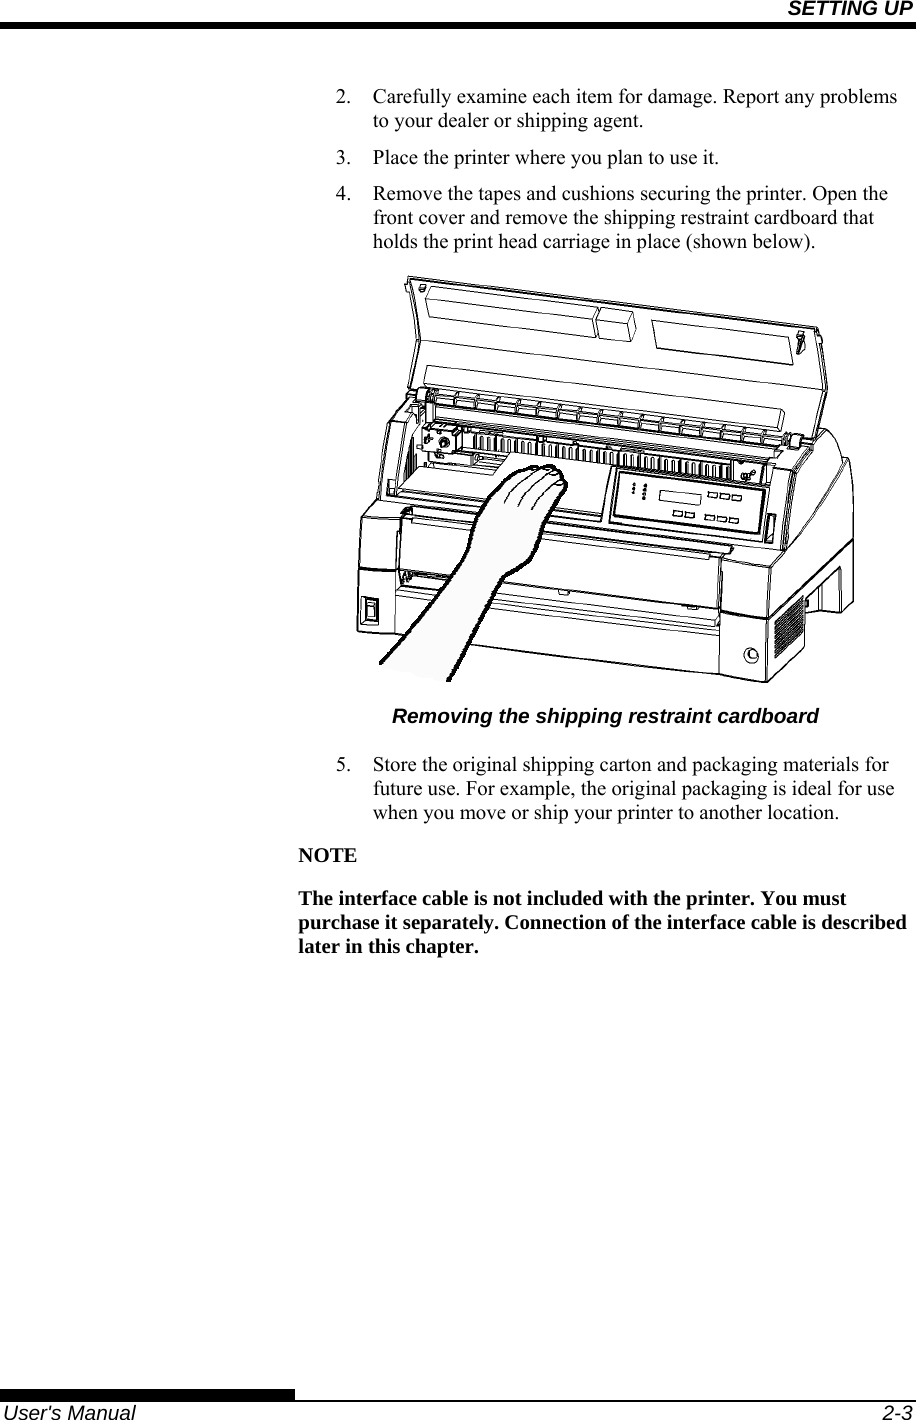 SETTING UP   User&apos;s Manual  2-3 2.  Carefully examine each item for damage. Report any problems to your dealer or shipping agent. 3.  Place the printer where you plan to use it. 4.  Remove the tapes and cushions securing the printer. Open the front cover and remove the shipping restraint cardboard that holds the print head carriage in place (shown below).  Removing the shipping restraint cardboard 5.  Store the original shipping carton and packaging materials for future use. For example, the original packaging is ideal for use when you move or ship your printer to another location. NOTE The interface cable is not included with the printer. You must purchase it separately. Connection of the interface cable is described later in this chapter.  